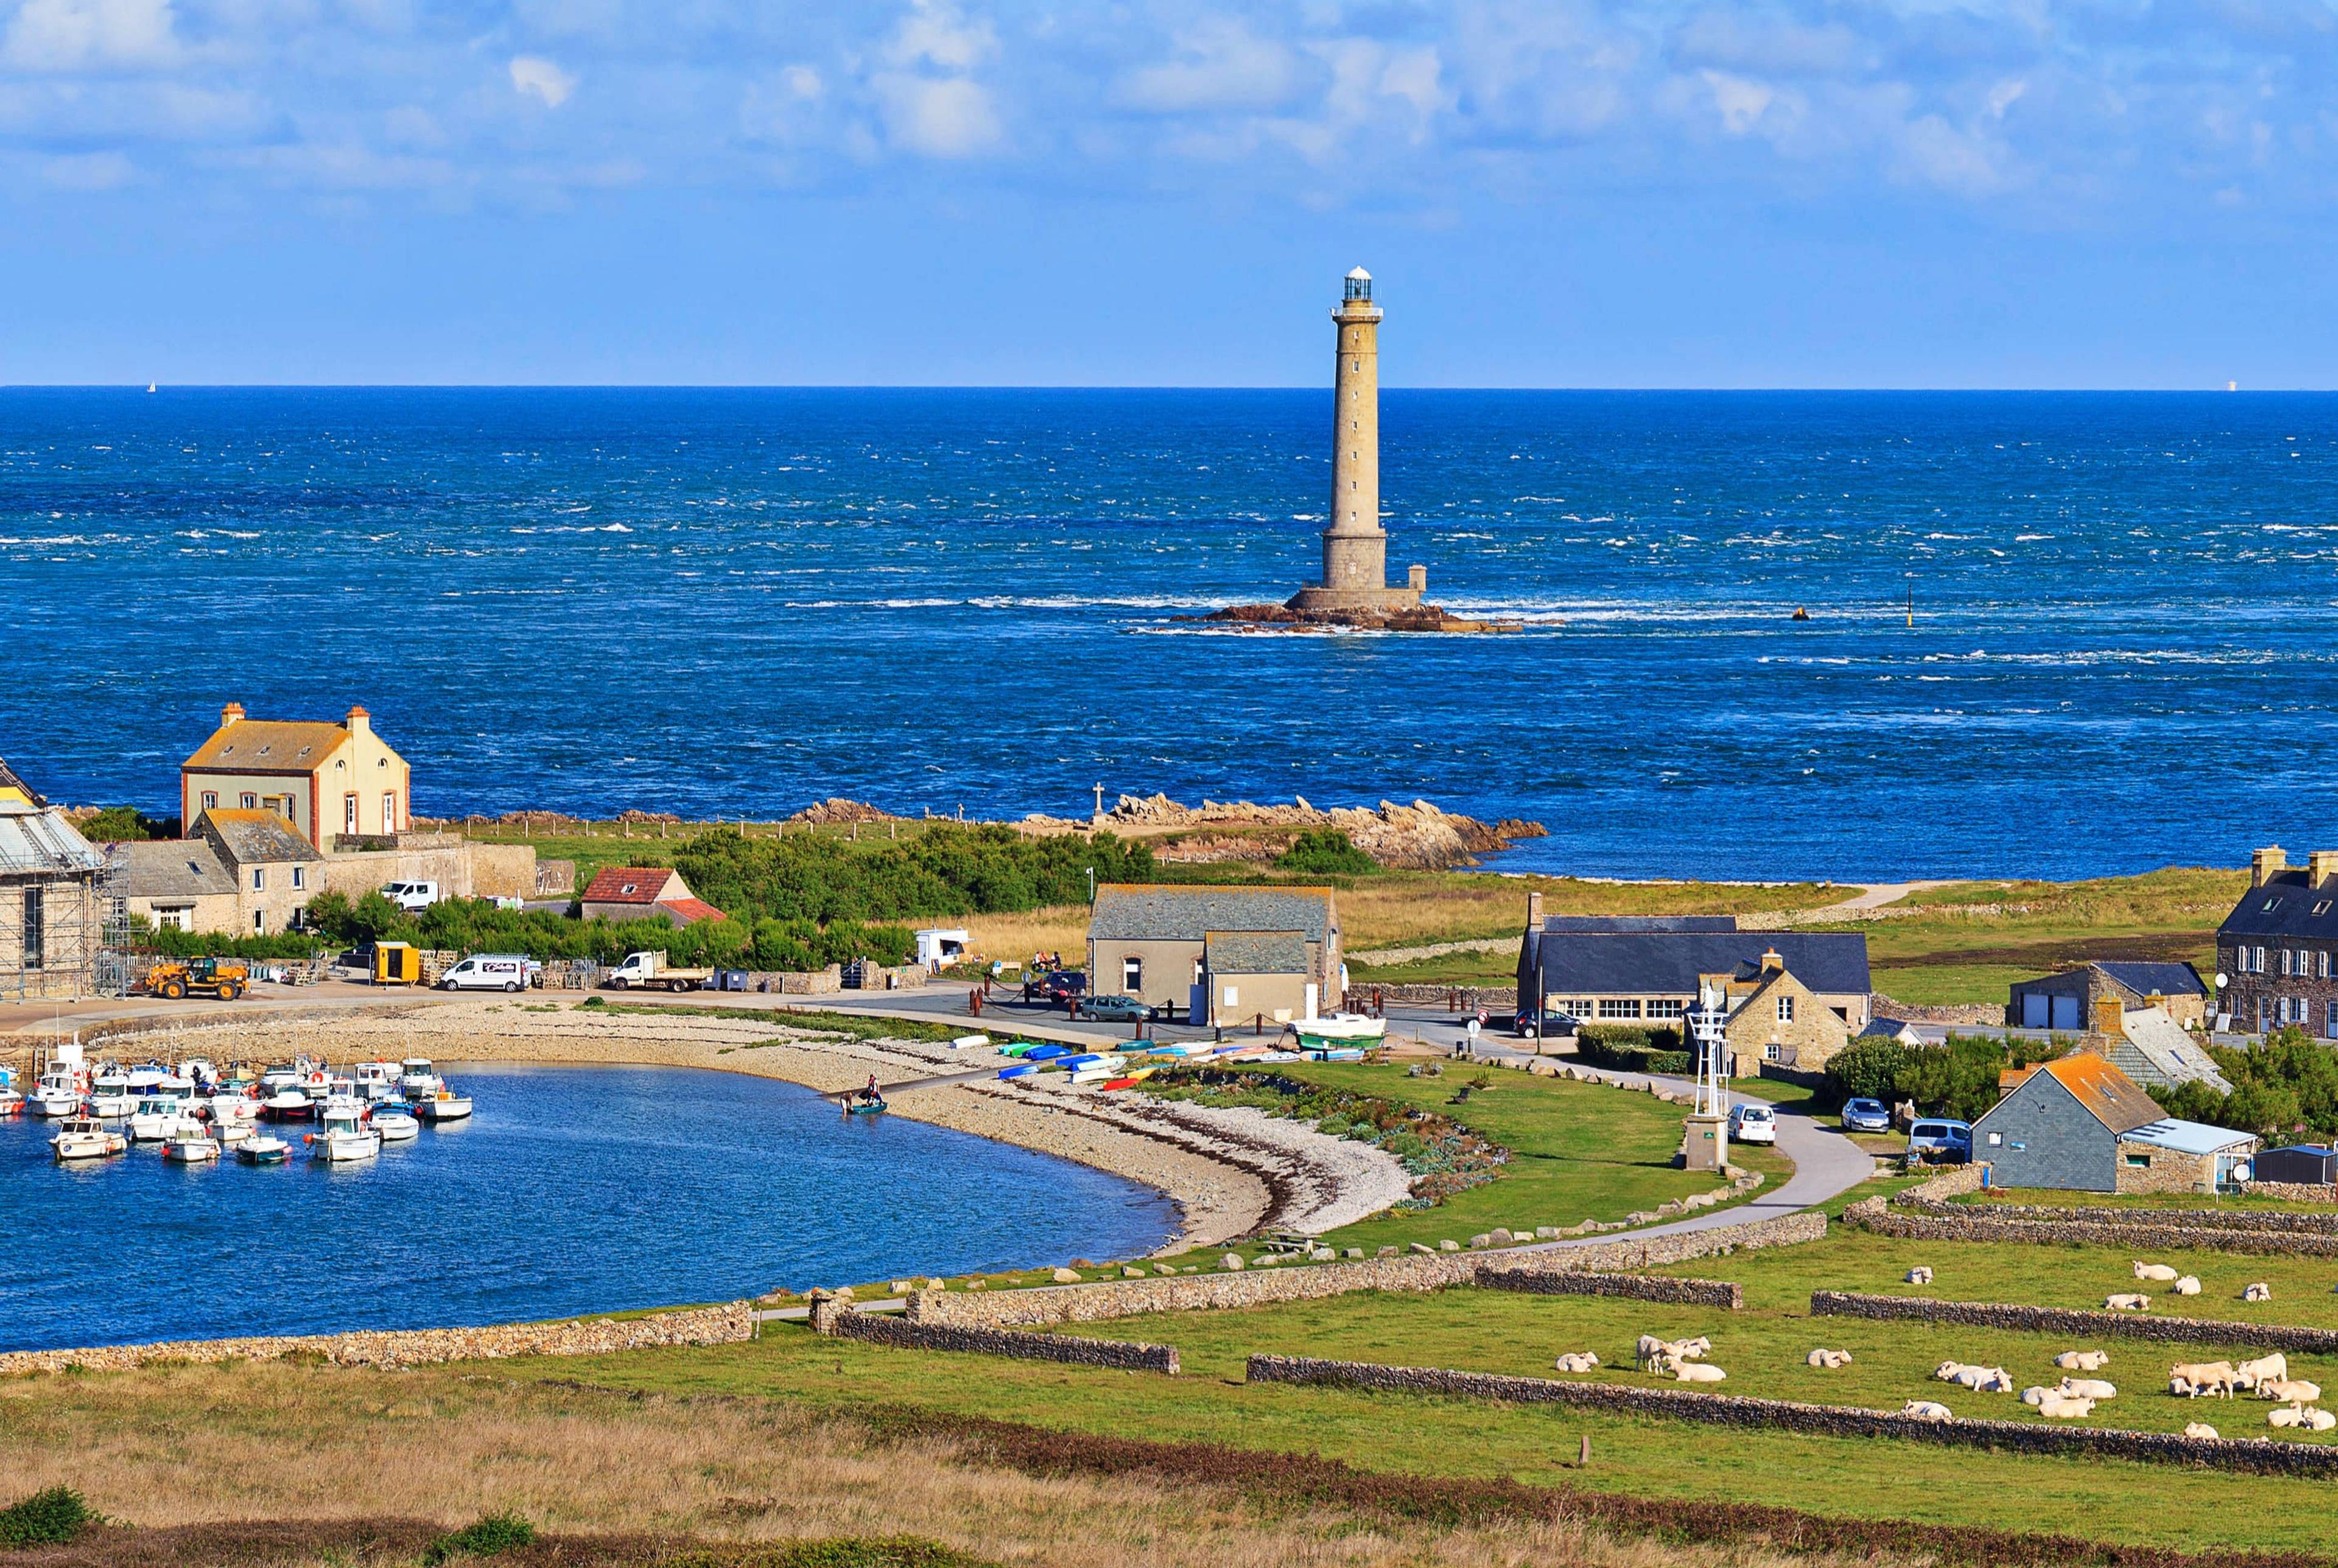 Sightseeing Cherbourg and the Cotentin Peninsula